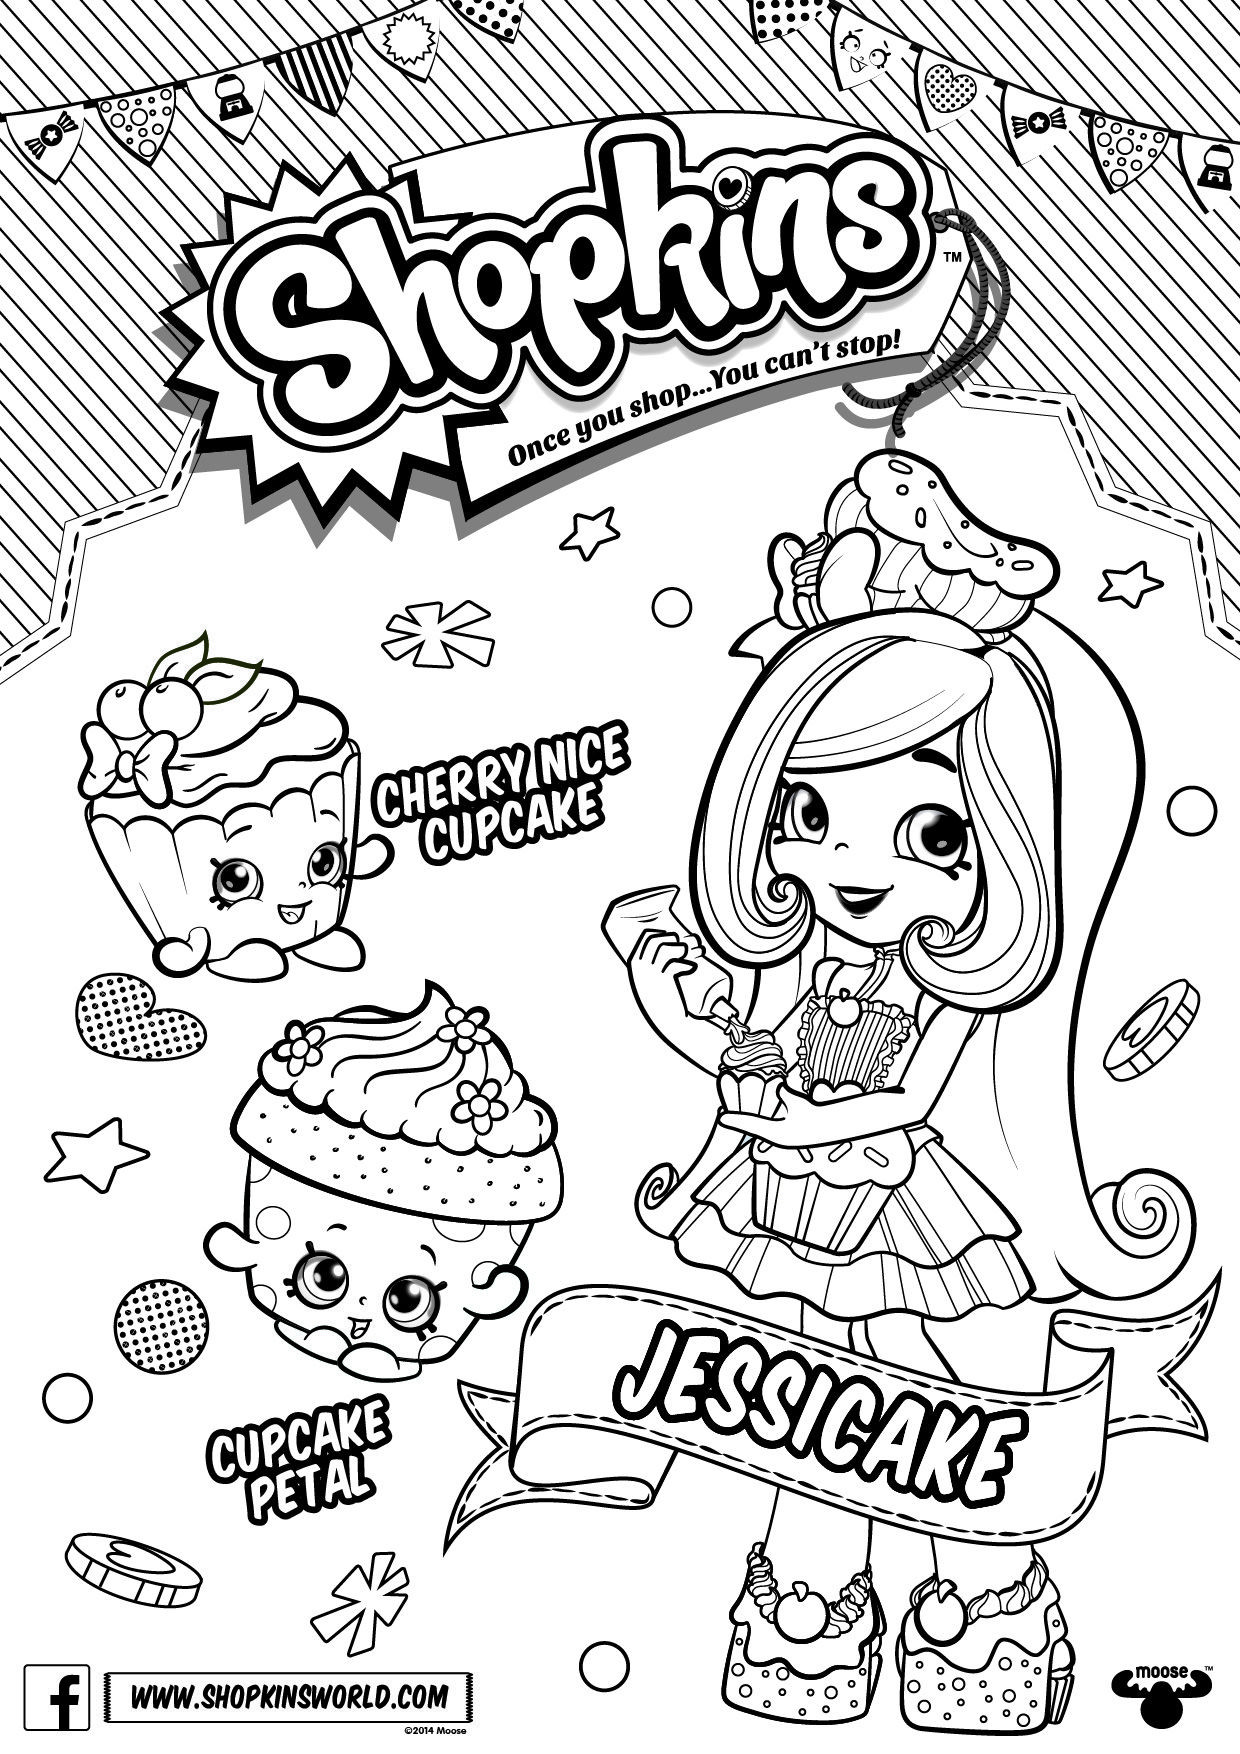 Printable Shopkin Coloring Pages
 Image result for shopkin coloring pages doll